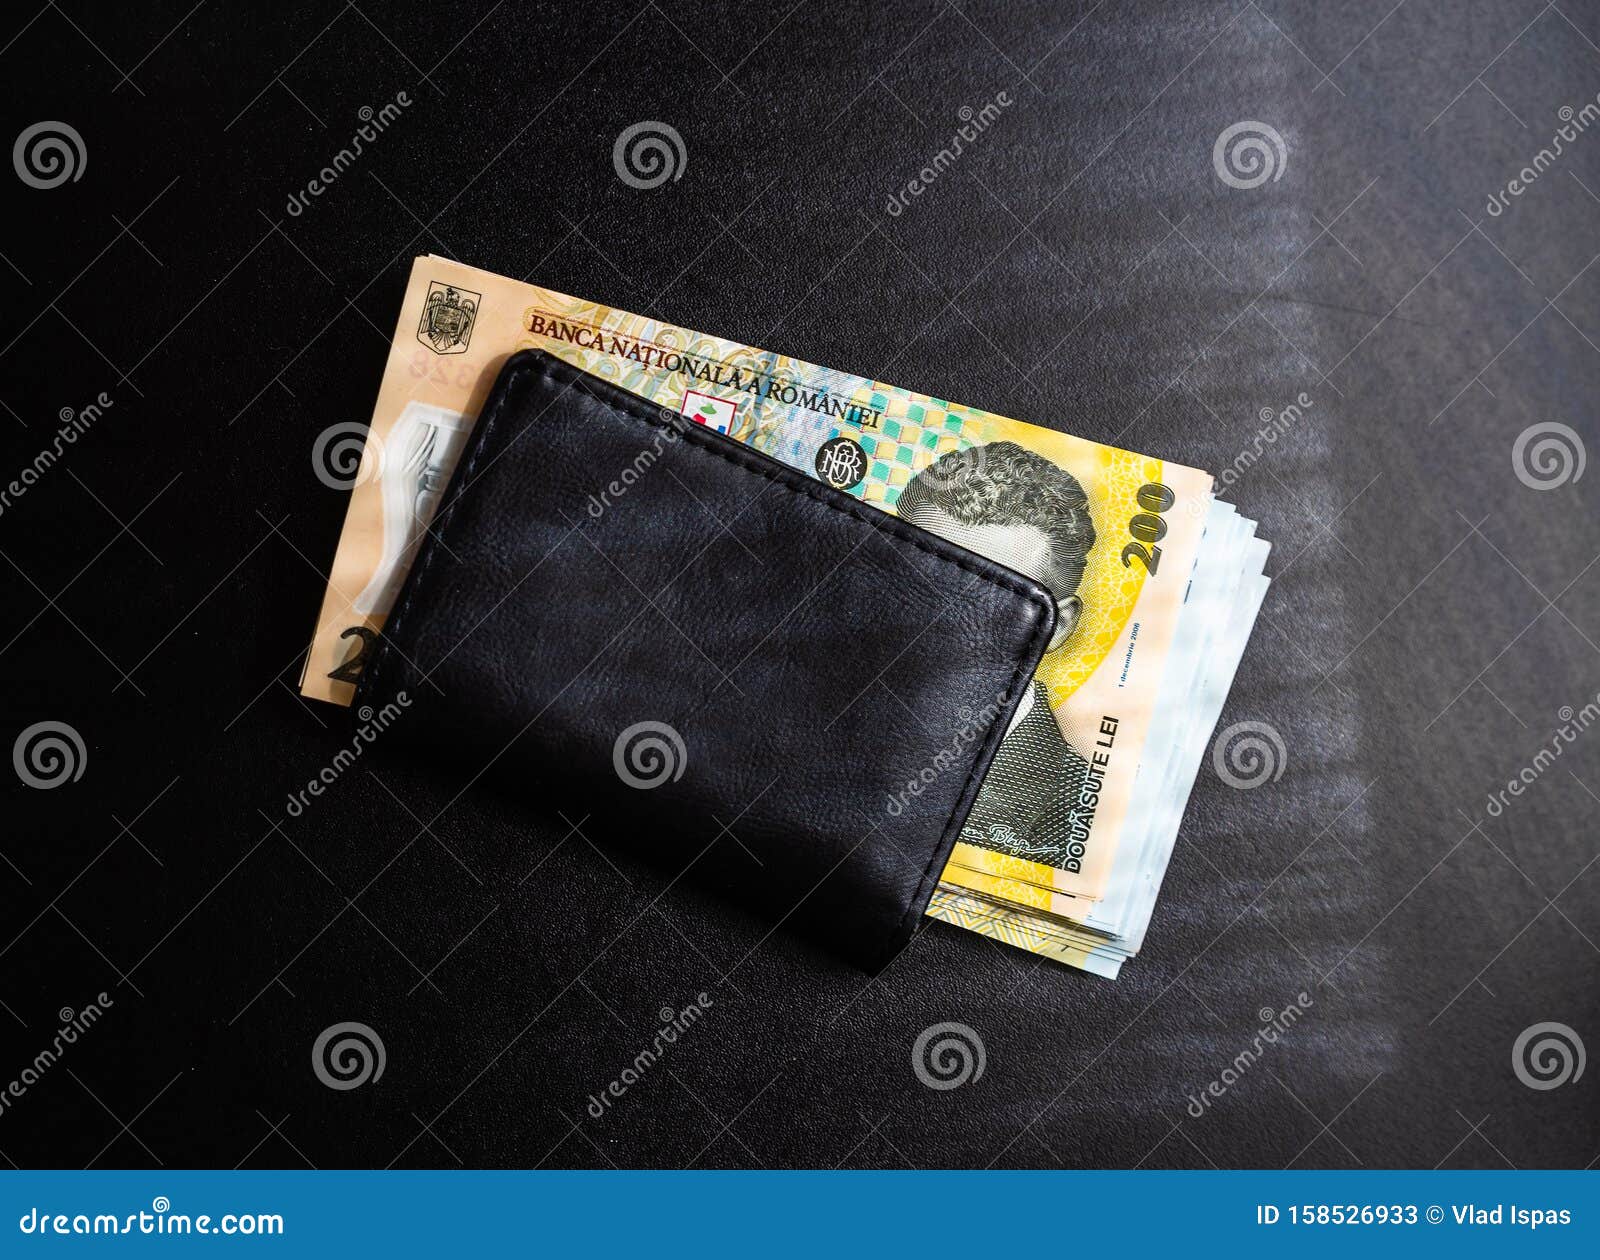 man wallet with money on the table, wallet with lei